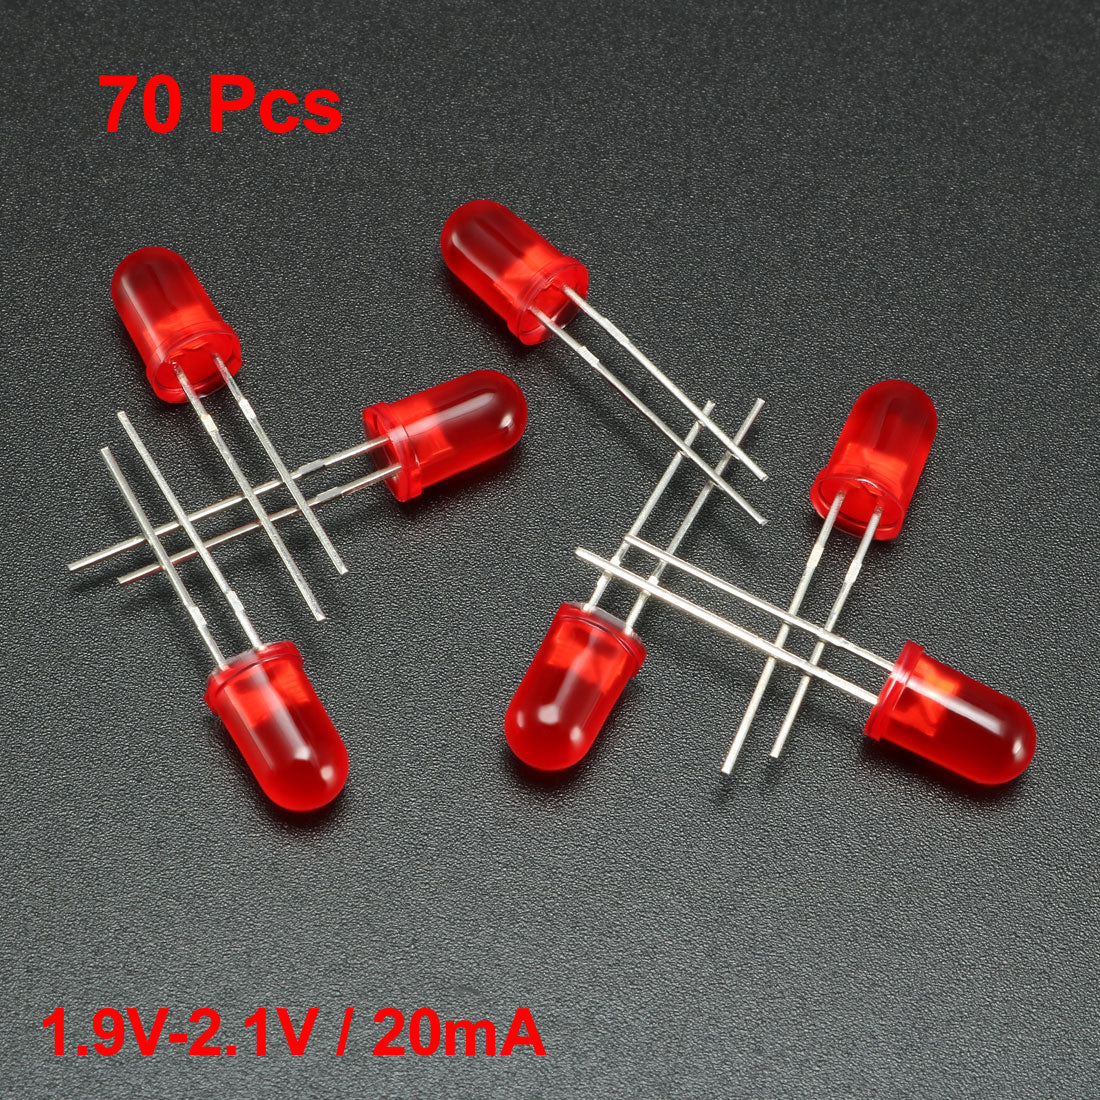 uxcell Uxcell 70pcs 5mm Red LED Diode Lights Colored Lens Diffused Round 1.9-2.1V 20mA 0.02W Lighting Bulb Lamp Electronic Components Light Emitting Diodes